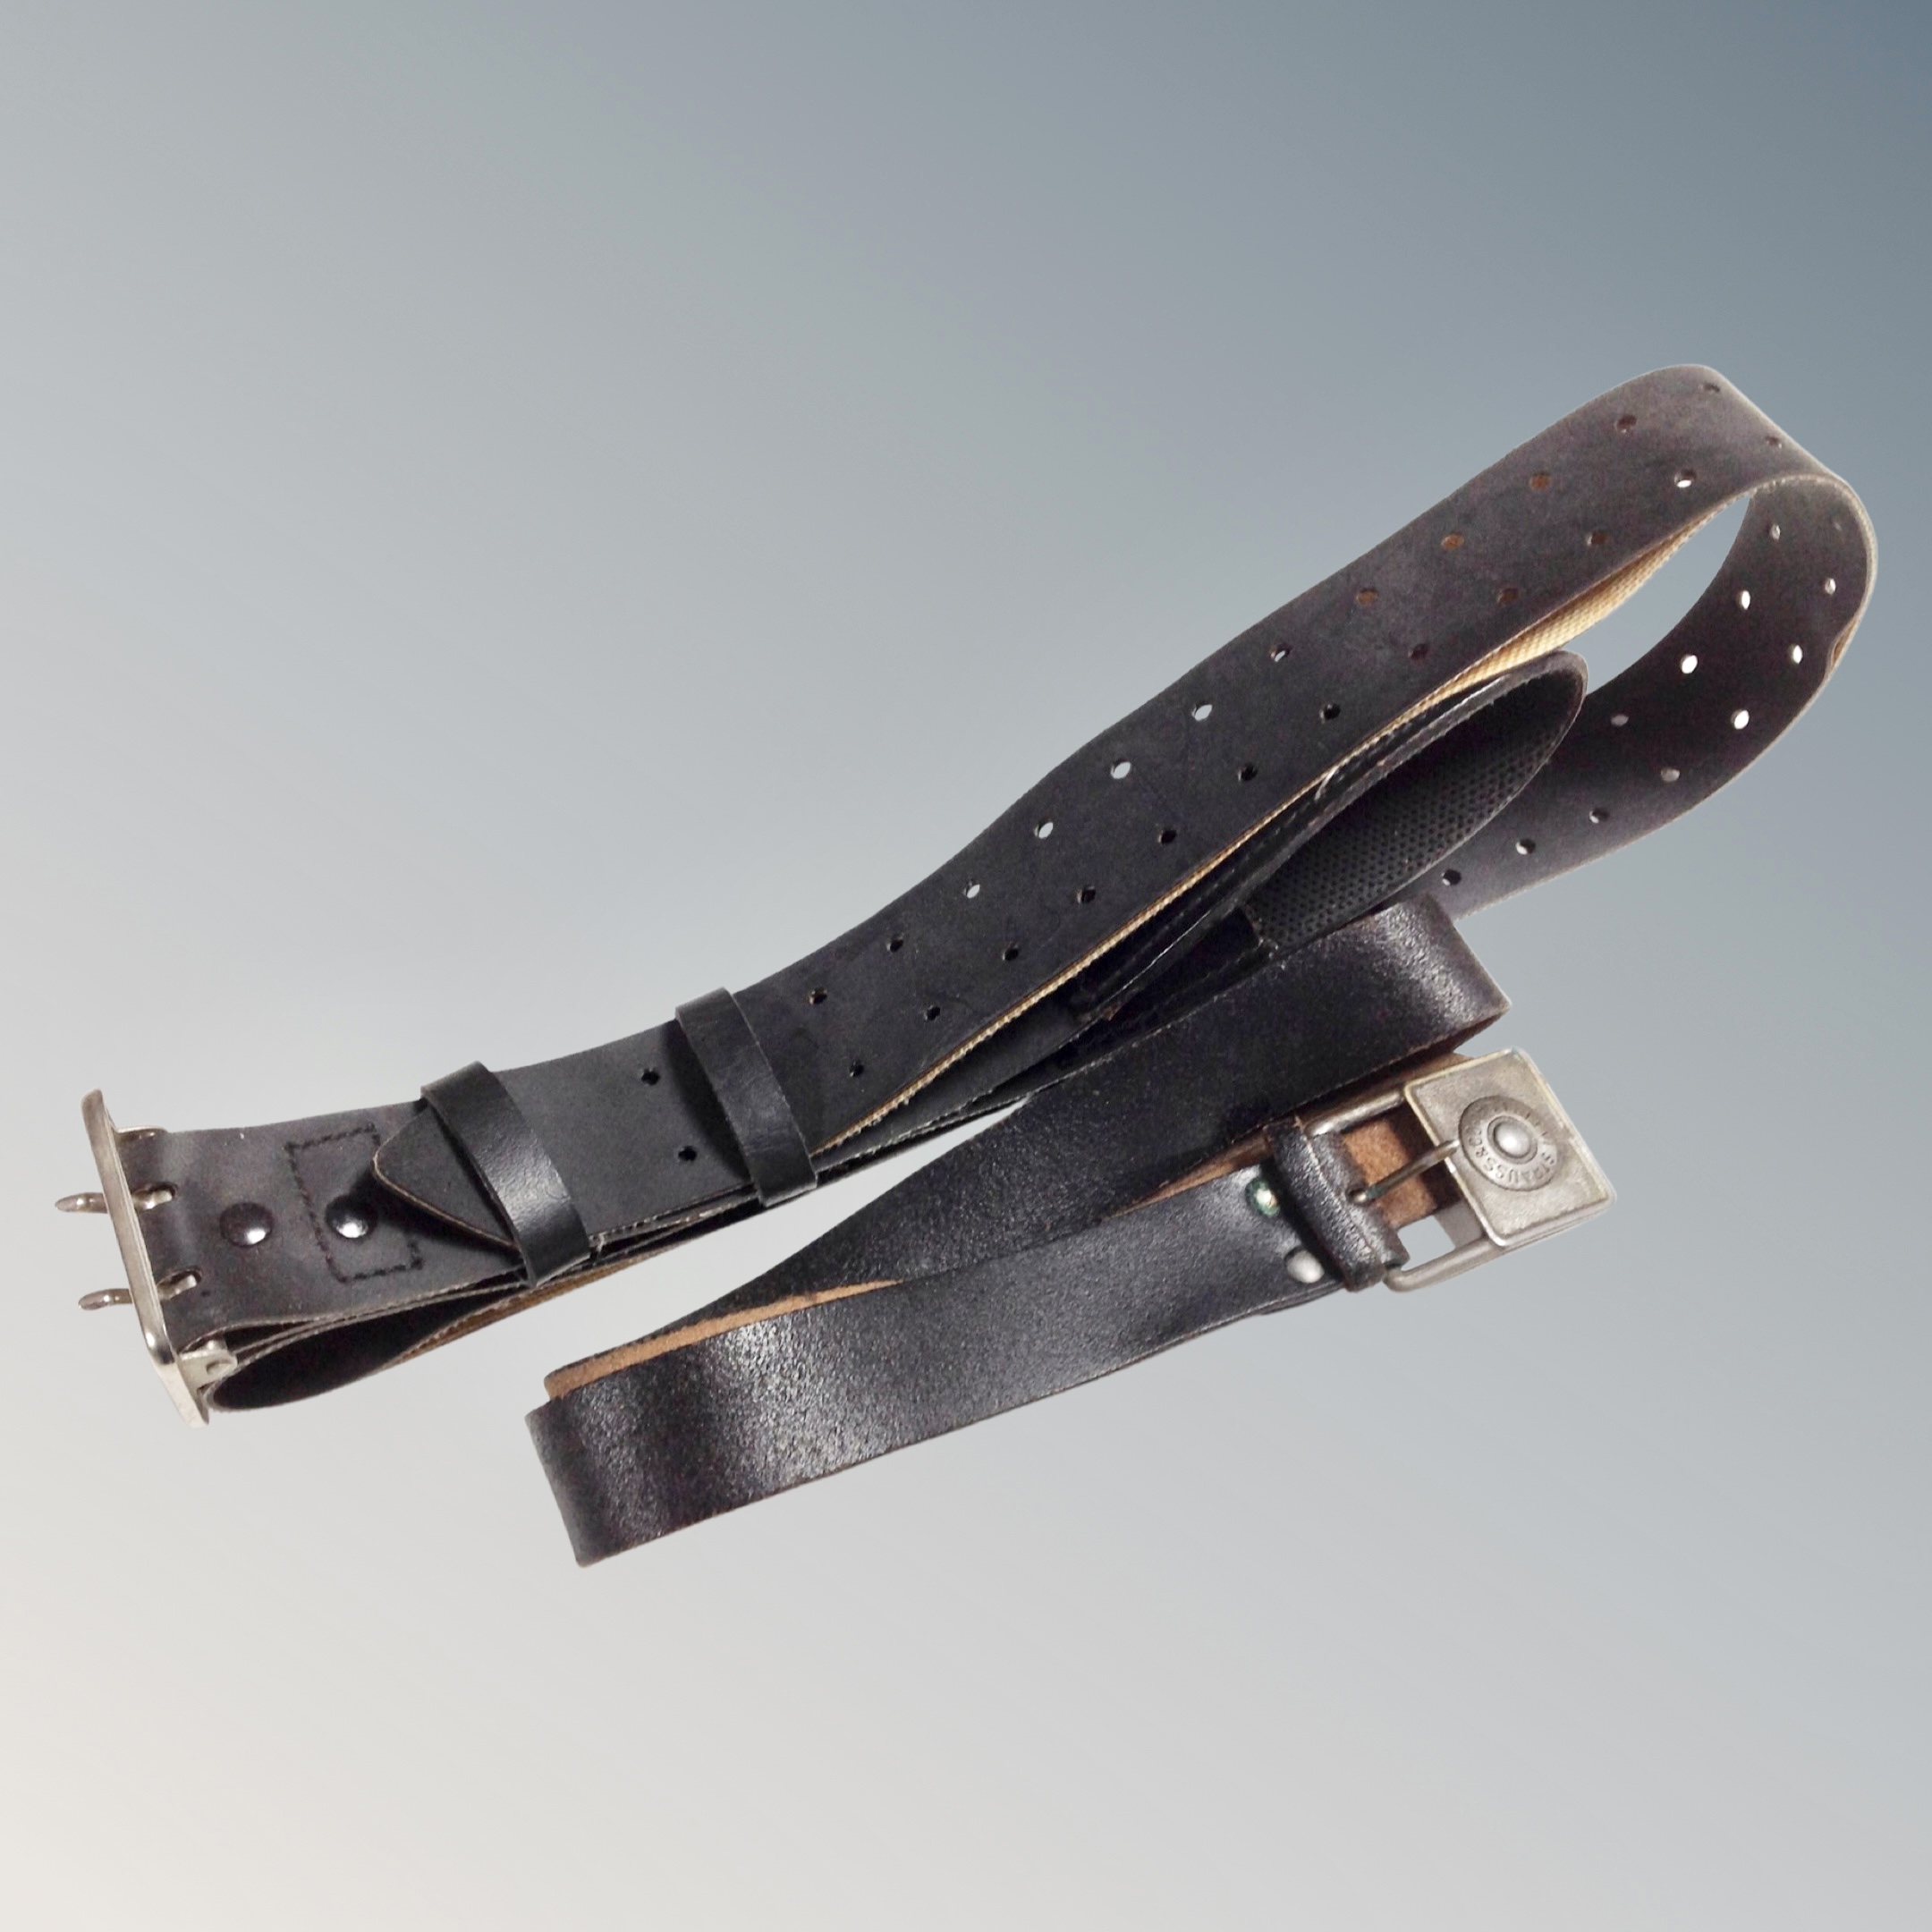 A knife in holster with belt - Image 2 of 2